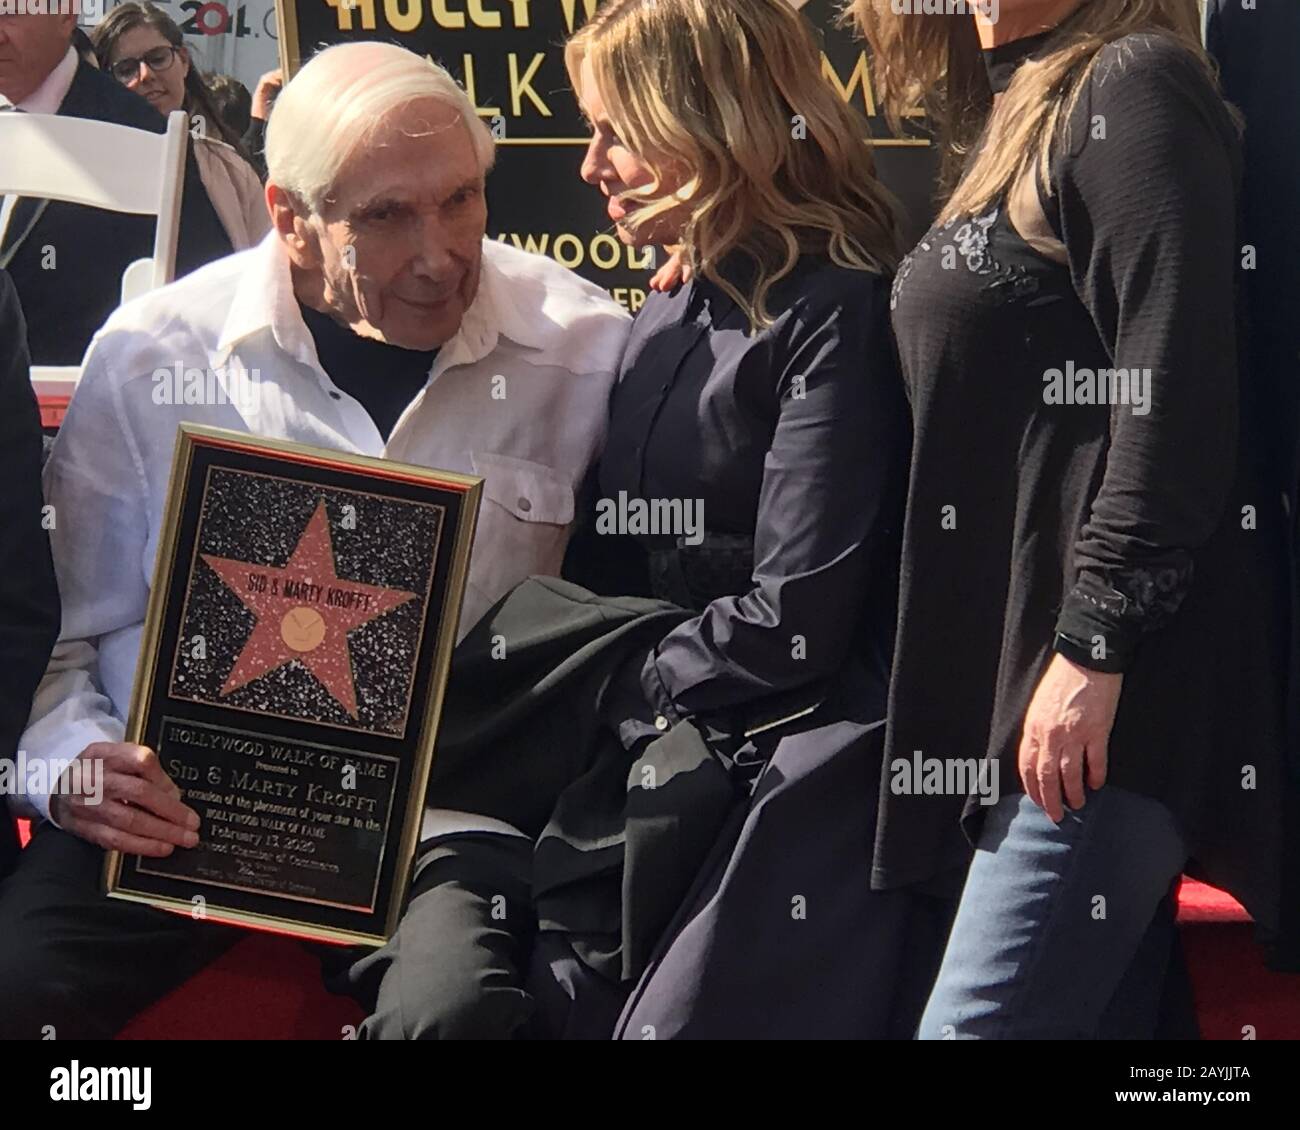 15 février 2020, Hollywood, Californie, États-Unis: I160889 CHW.Hollywood Chamber Of Commerce Honors Sid & Marty Krofft With Star On the Hollywood Walk Of Fame .6201 Hollywood Boulevard, Los Angeles, Californie, États-Unis .02/13/2020 .MARTY KROFFT, MAUREEN MCCORMICK ET SUSAN OLSON .Clinton H.Wallace/Photomundo International Photos/ image Credit: © Clinton Wallace/Globe Photos via ZUMA Wire) Banque D'Images